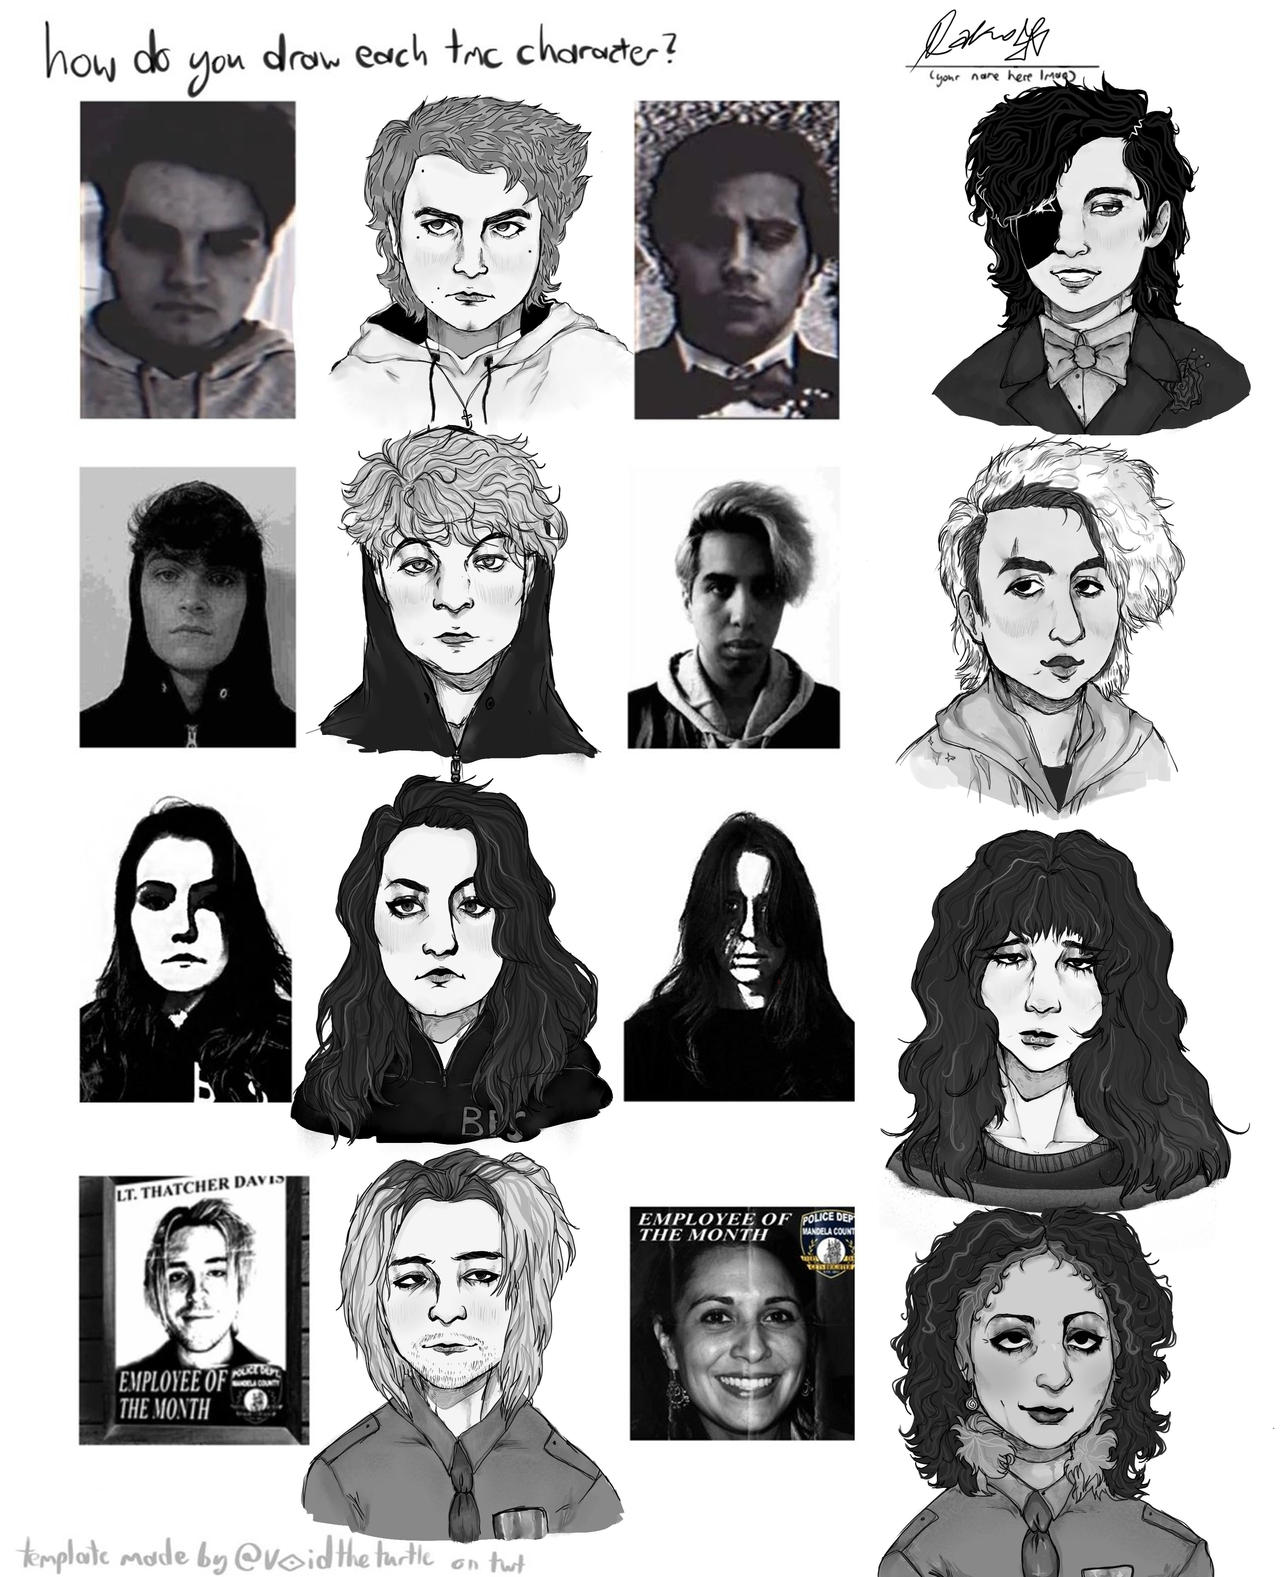 TMC Characters In My Style by PurpleGlasses666 on DeviantArt